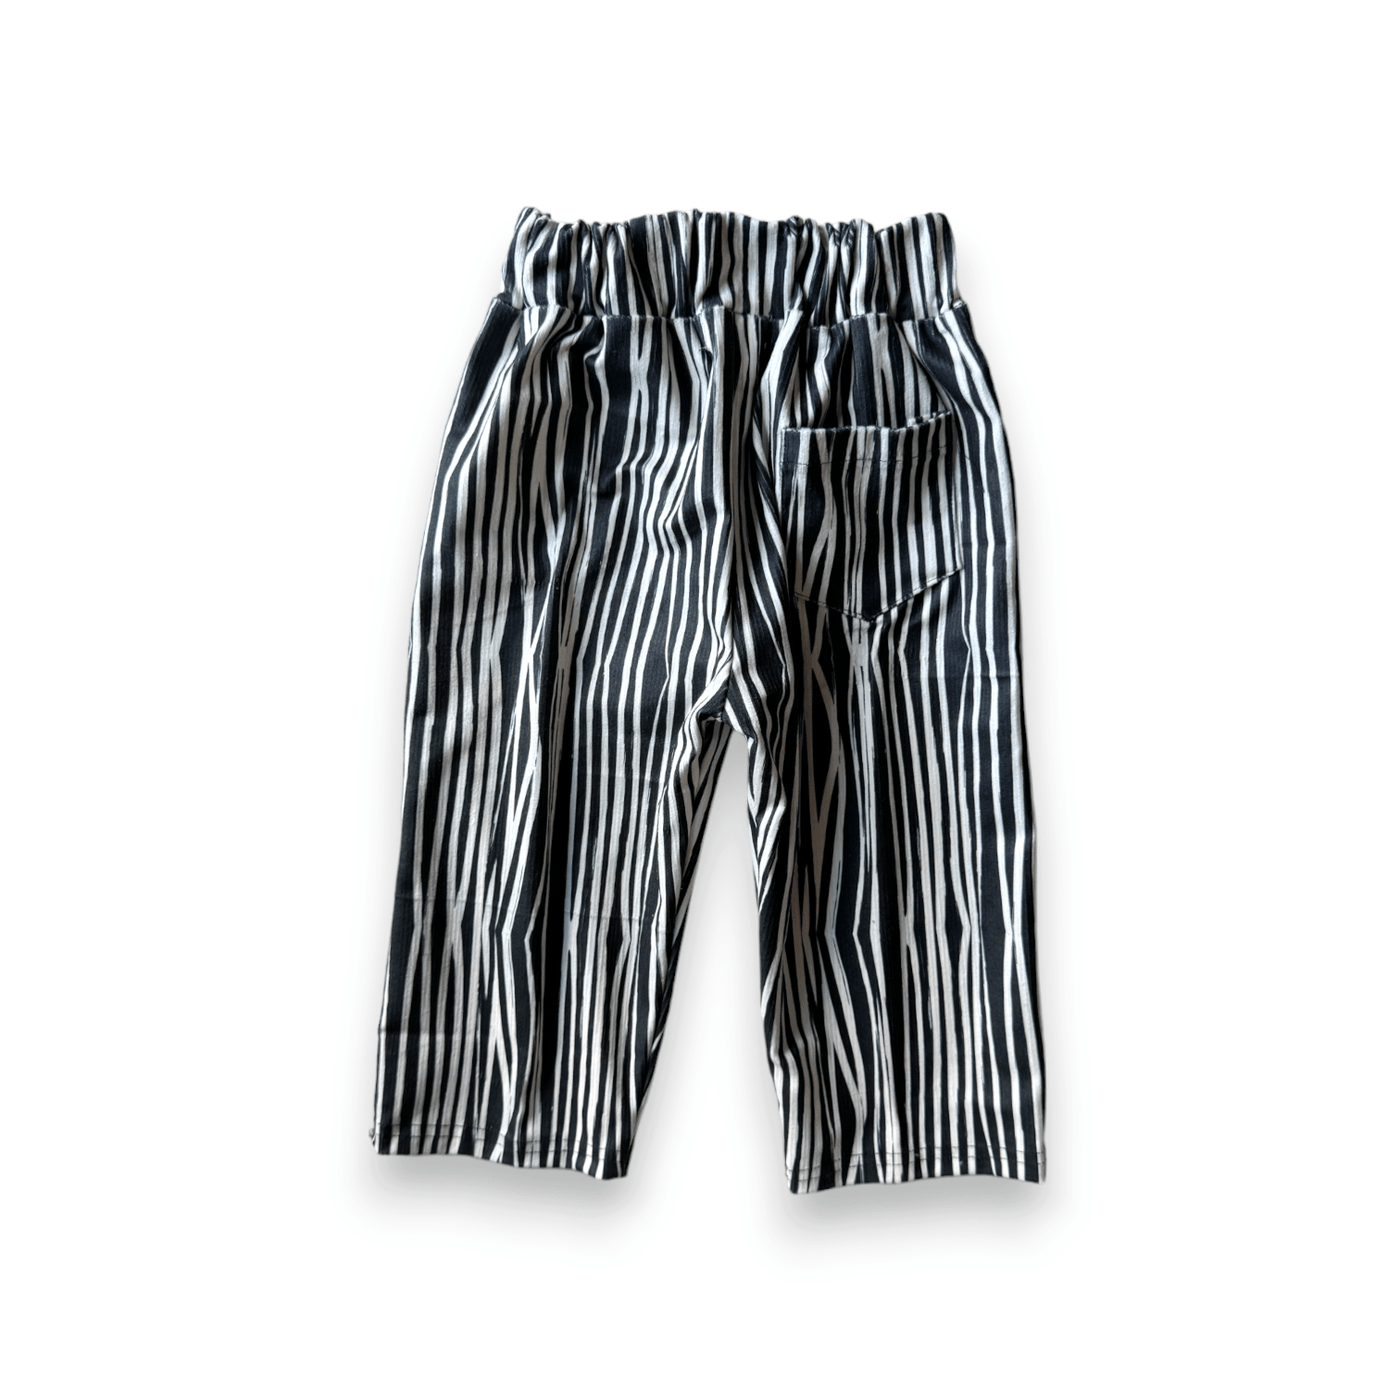 Best Day Ever Kids Baby & Toddler Bottoms The Big Baggy Corduroy Pant - Super Stripe buy online boutique kids clothing